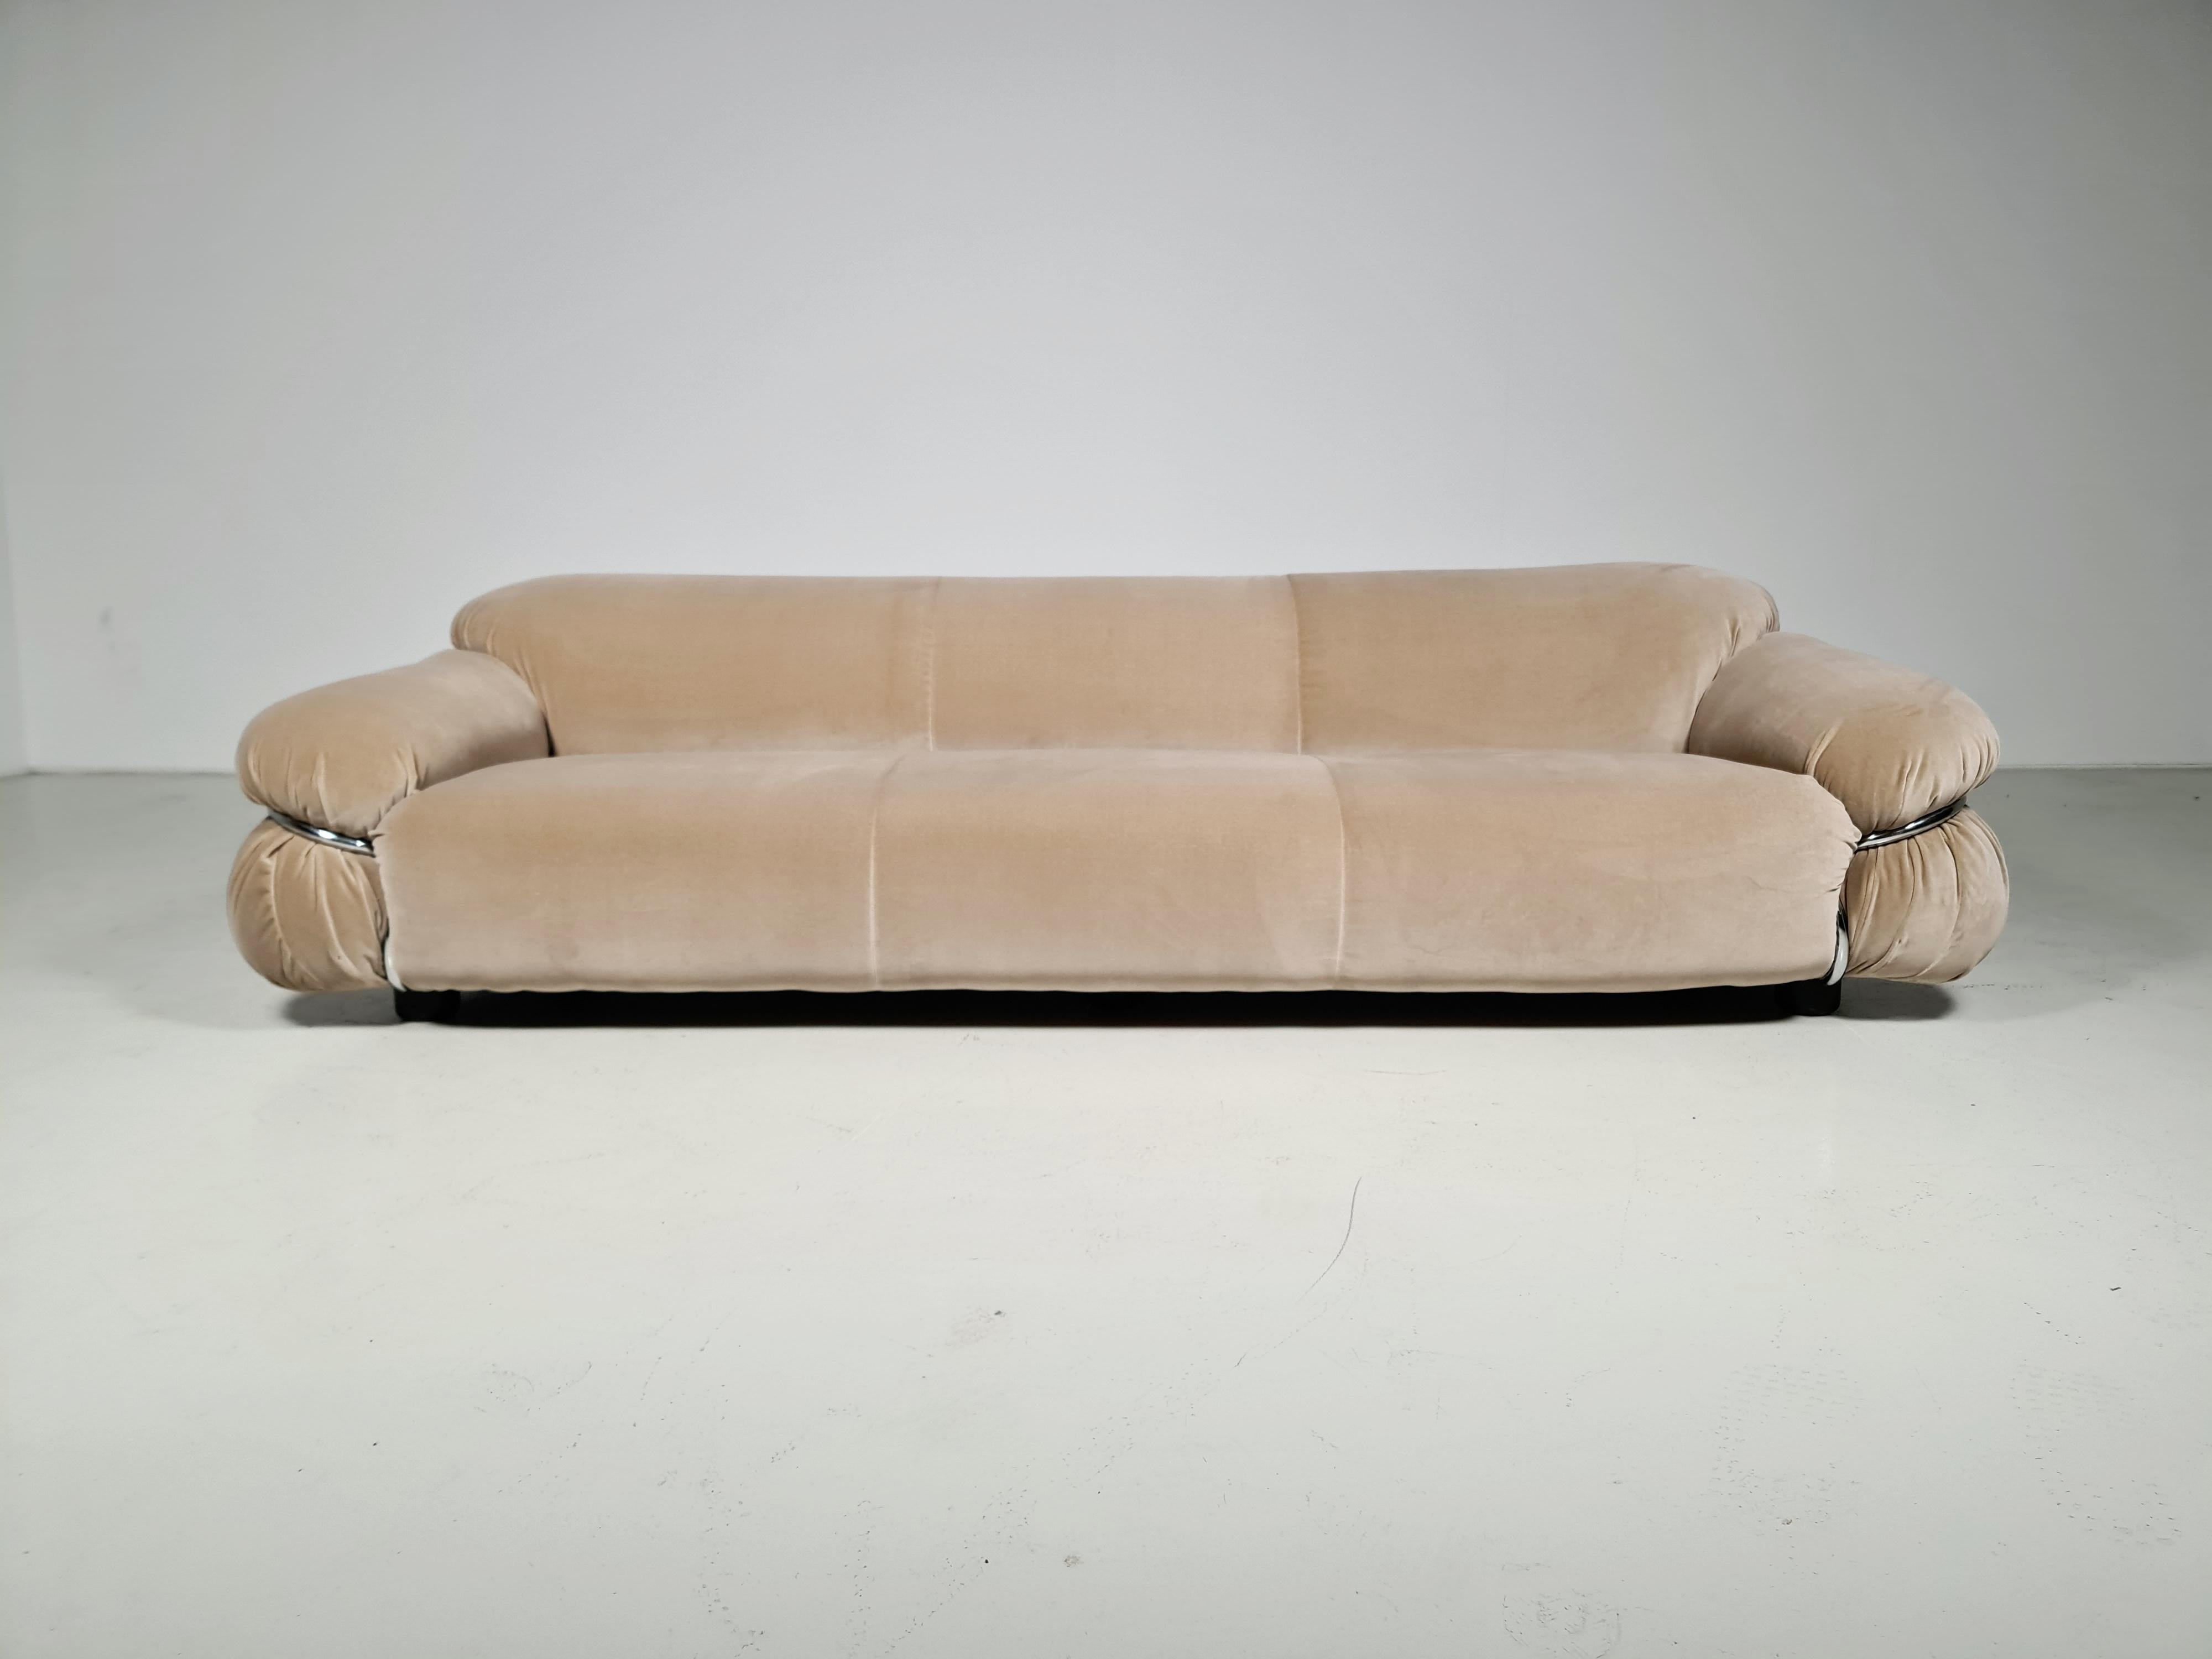 Early edition 3-seater sofa designed by Gianfranco Frattini for Cassina, Italy 1970. This sofa is reupholstered in high-quality cotton velvet upholstery with a chrome tubular metal frame. The sofa has very comfortable seating and the chrome is in